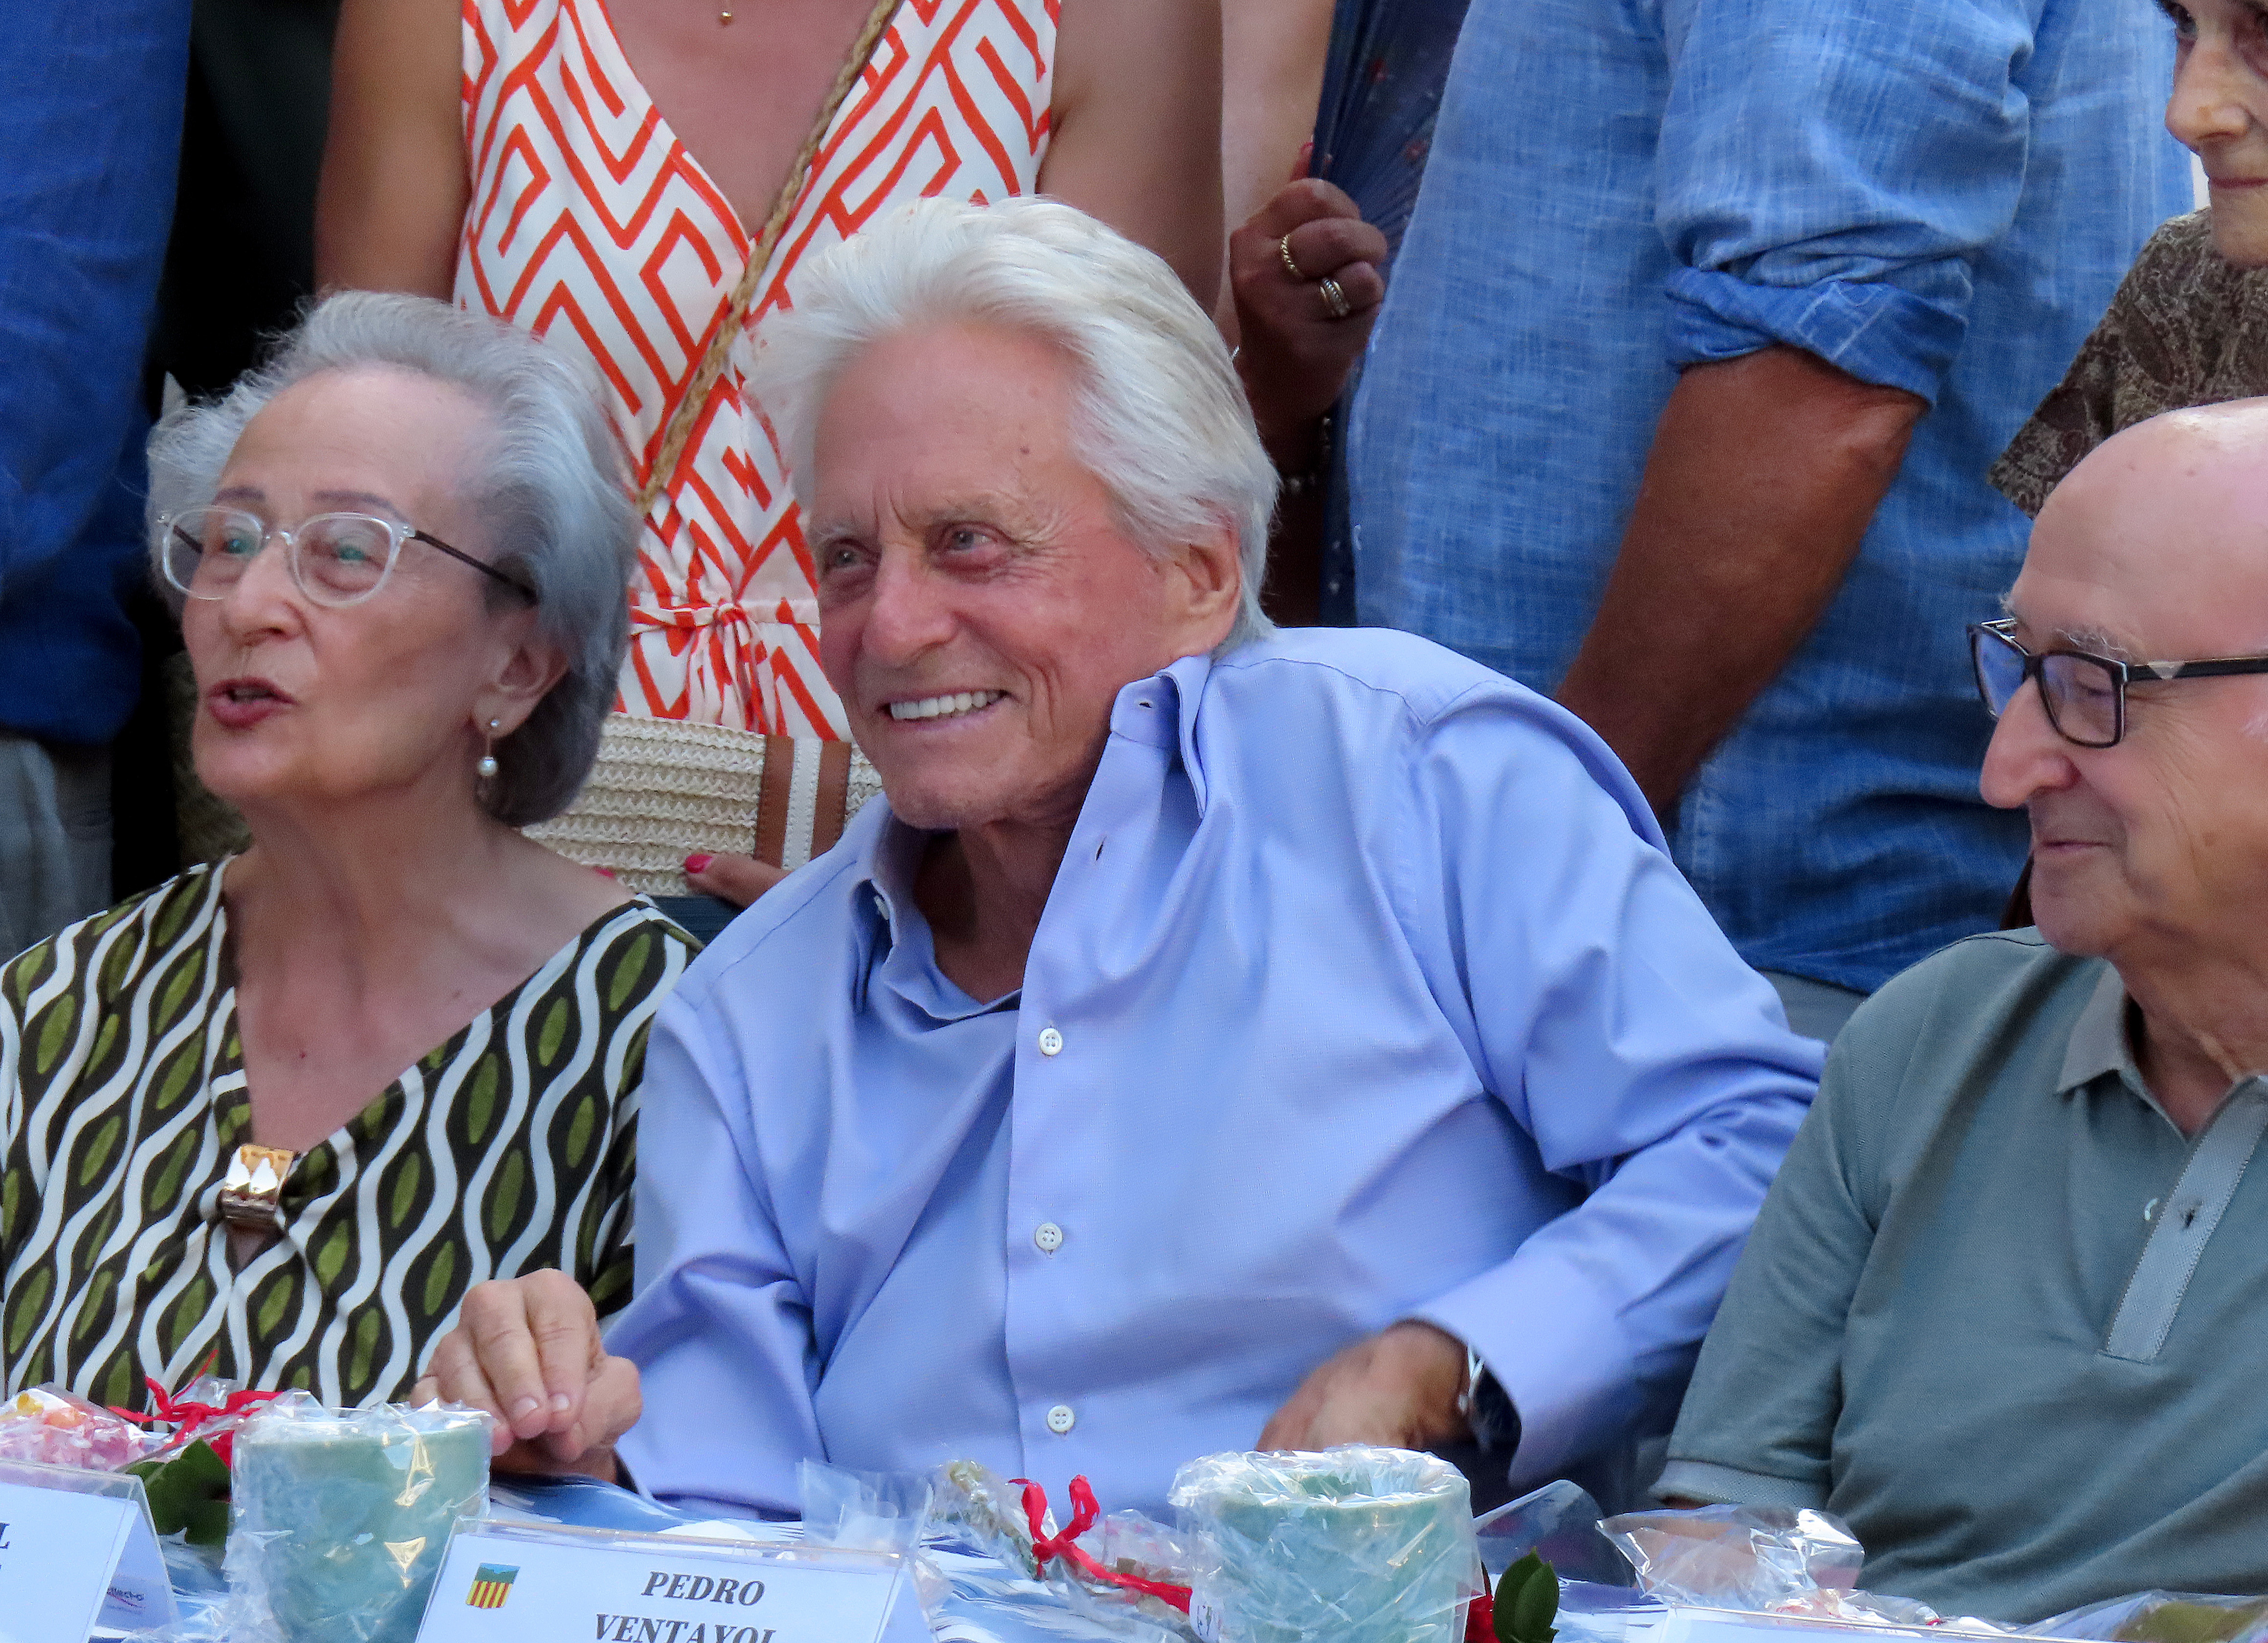 Michael Douglas was seen being celebrated in a tribute to octogenarians at a local Patron Saint Festival In Mallorca, Spain